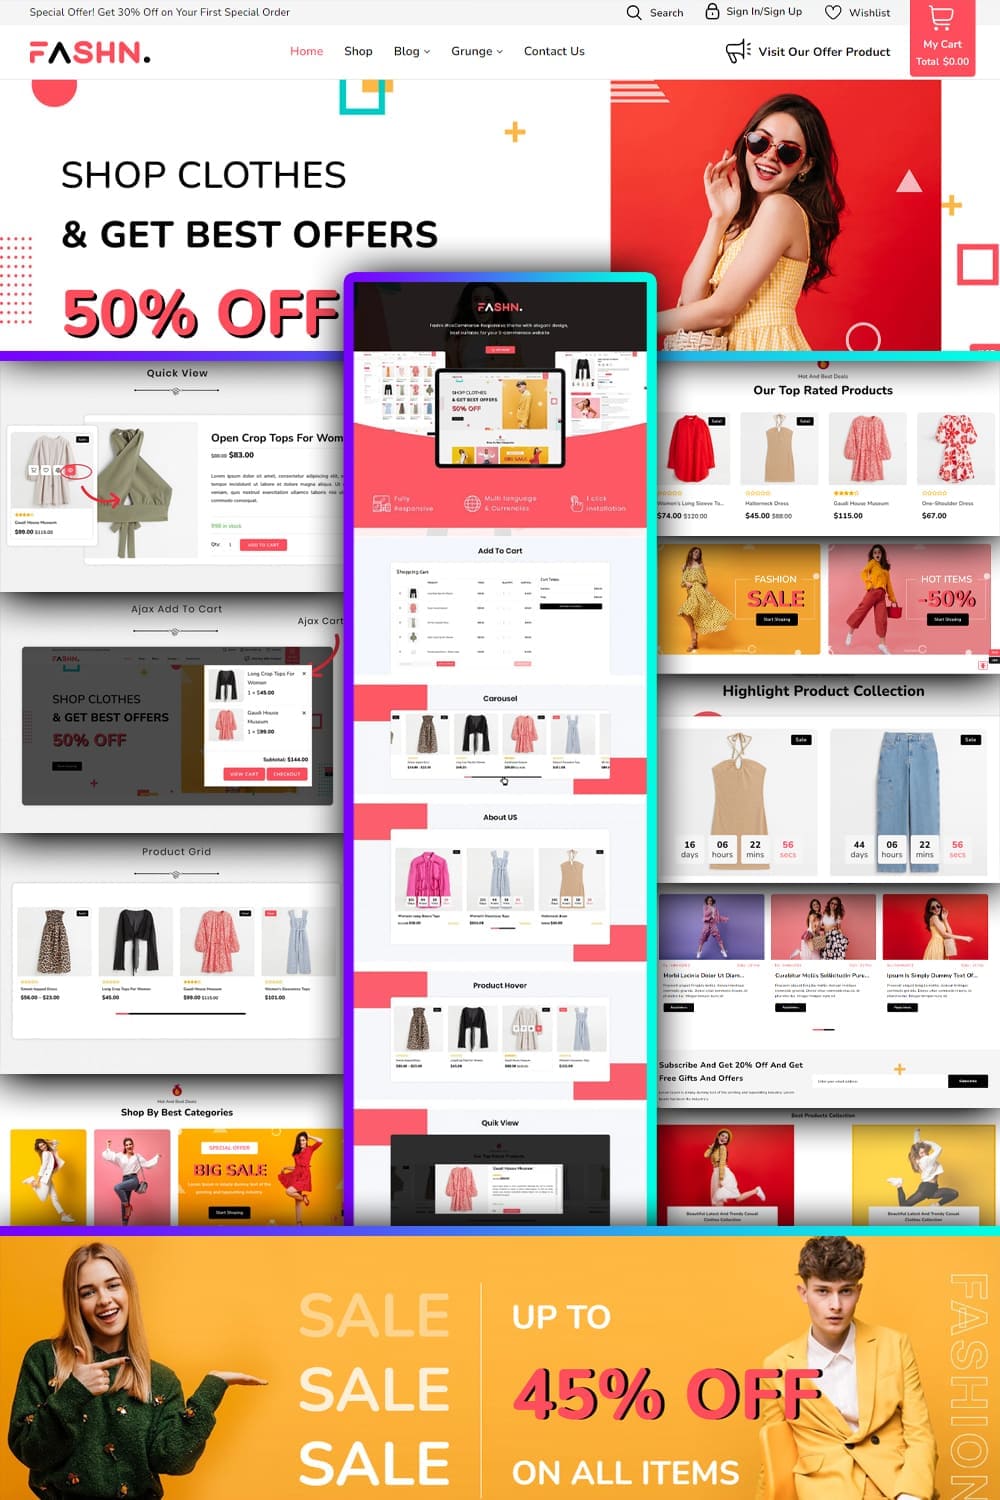 Fashn modern amp minimal fashion woocommerce template, picture for pinterest..